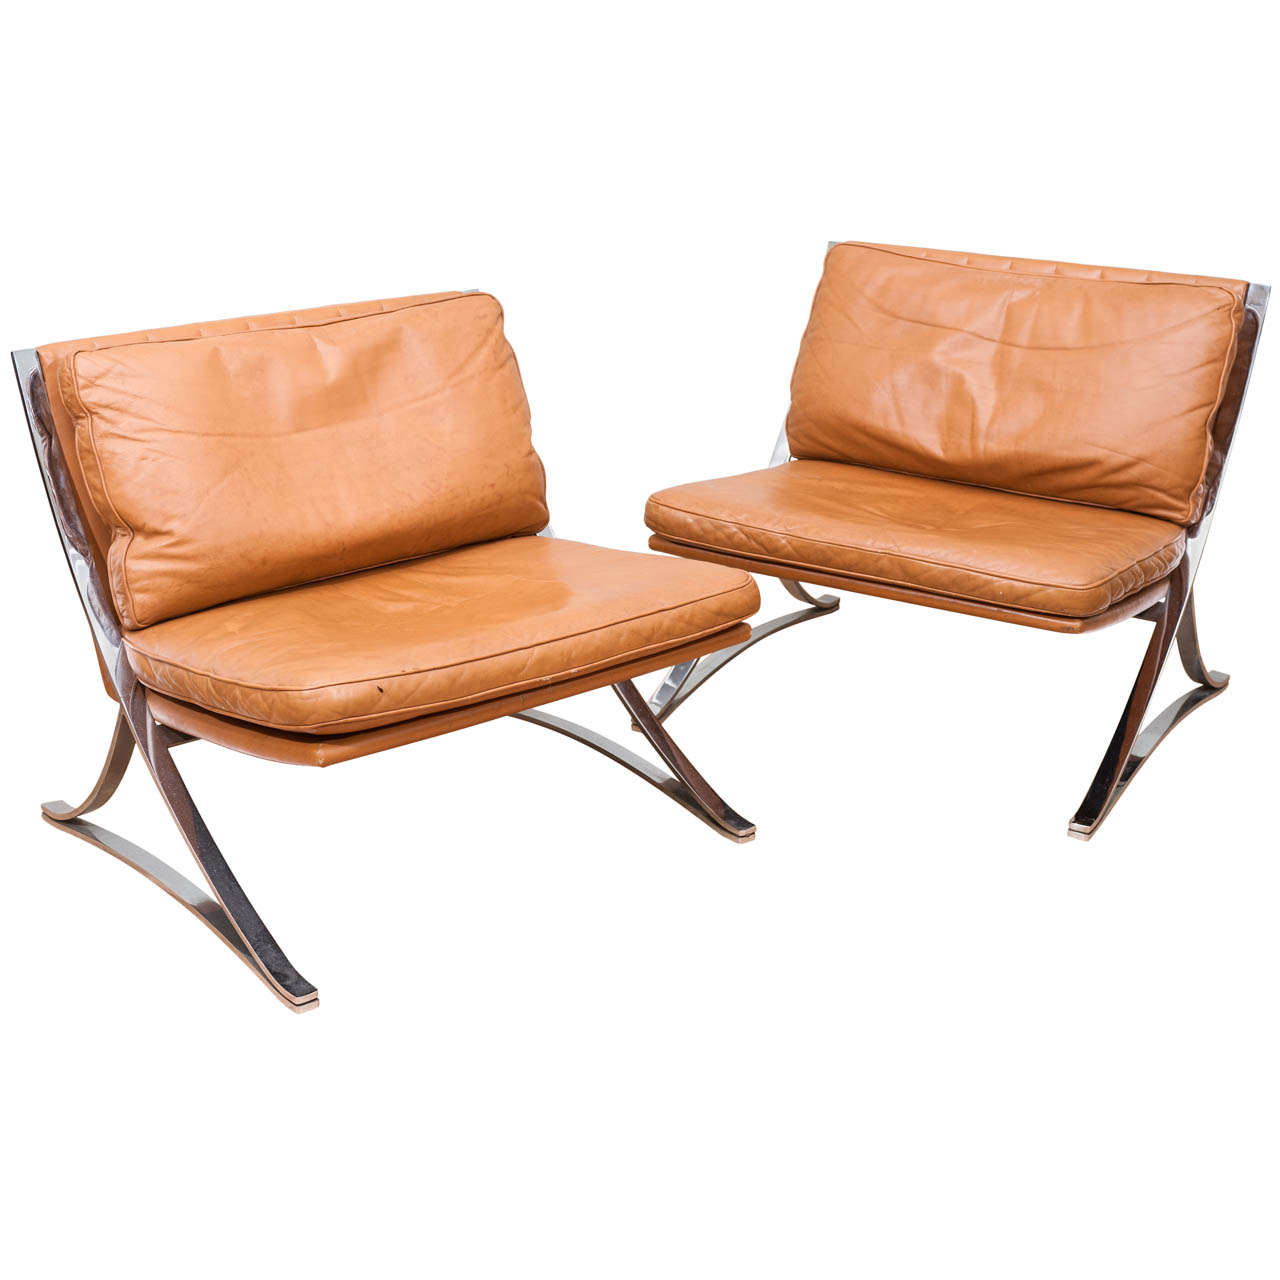 Pair of Vintage Leather Chairs In the Style of Mies van der Rohe